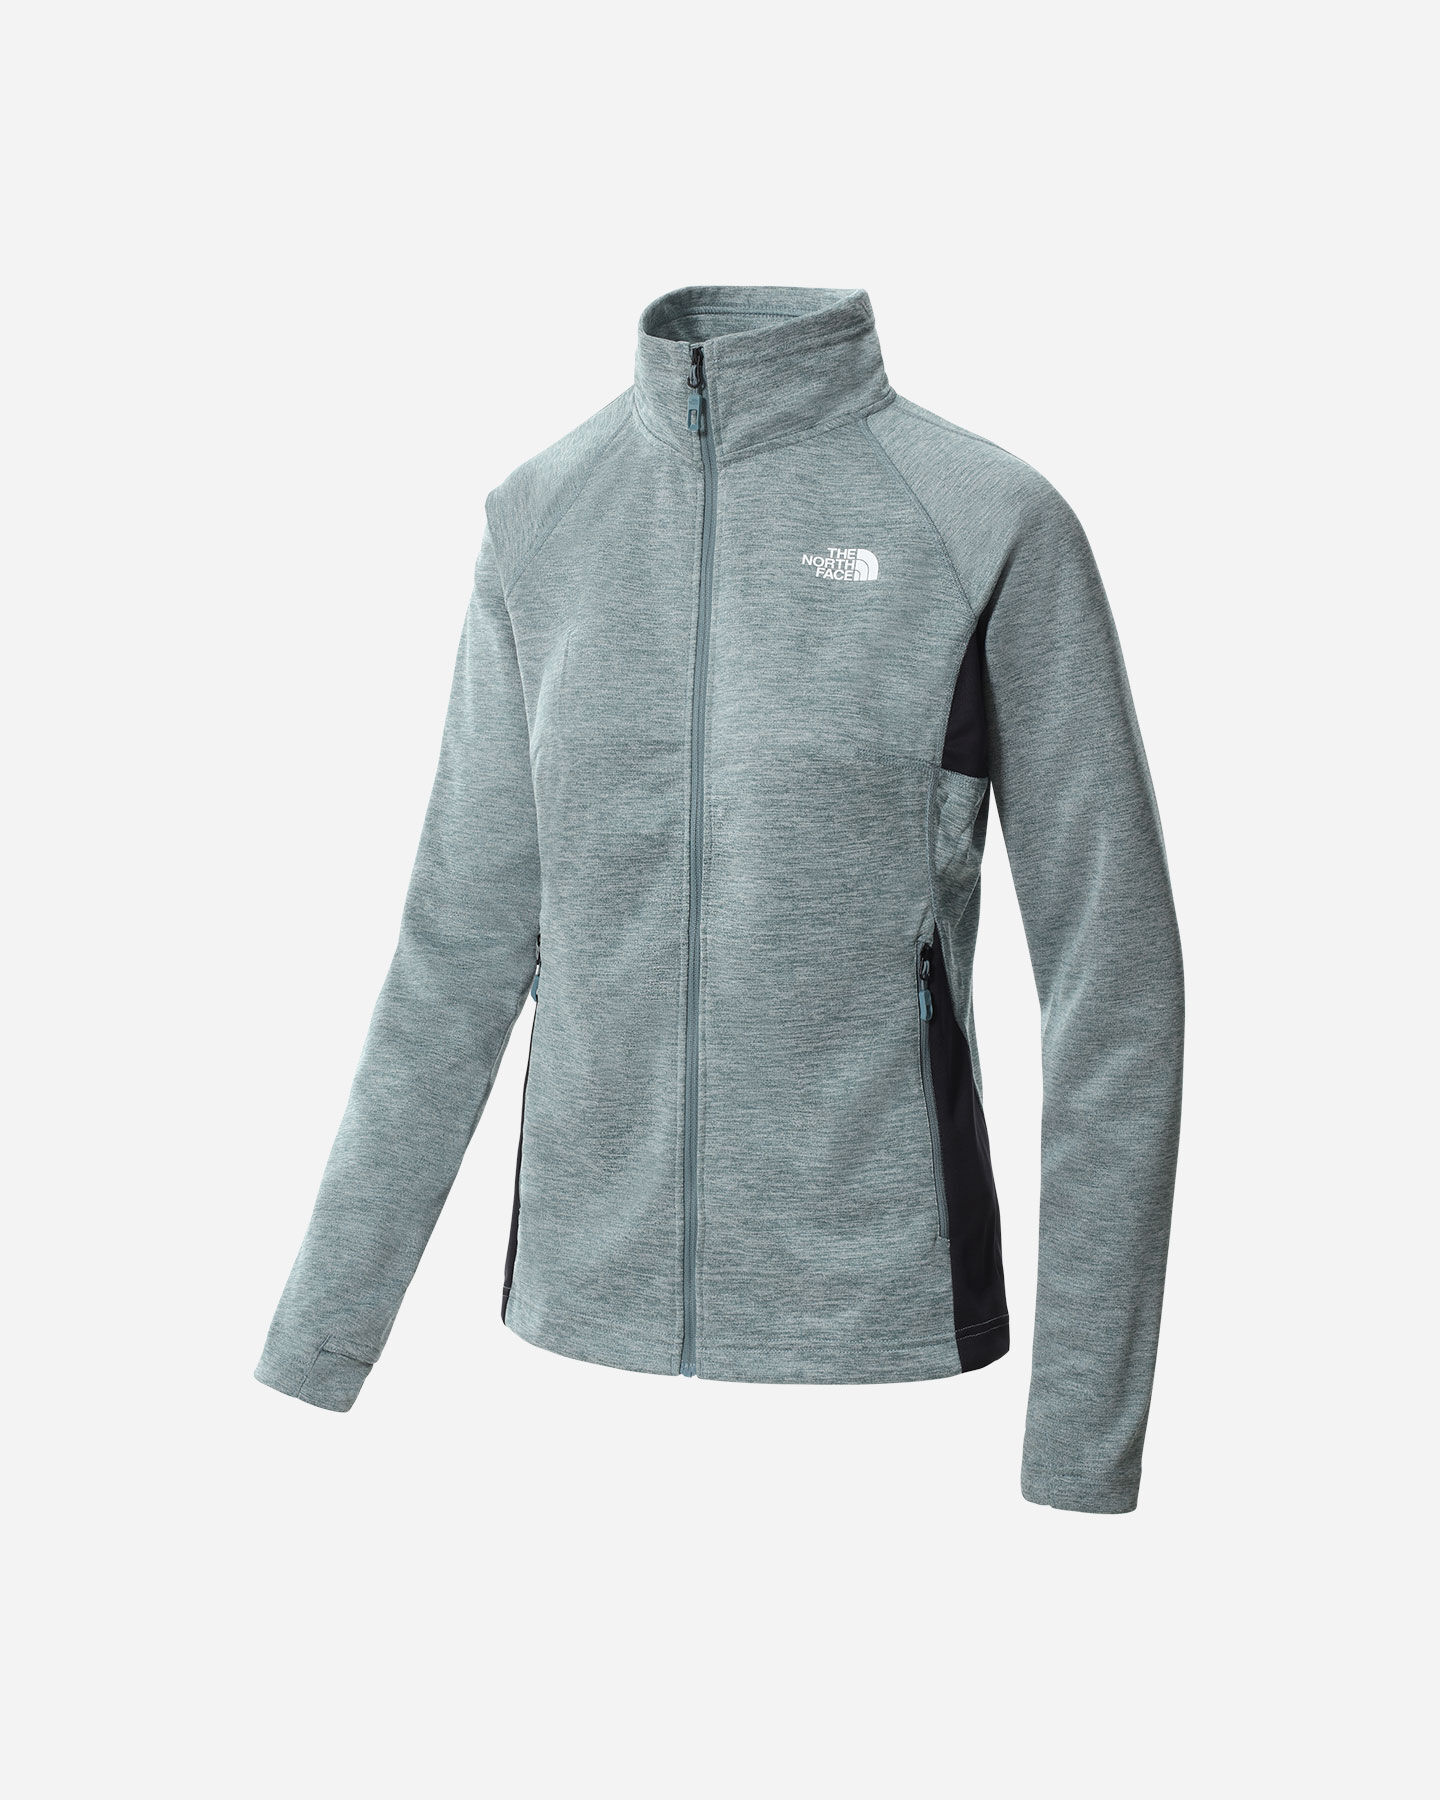  Pile THE NORTH FACE FULL ZIP MIDLAYER W S5423045|6Q0|S scatto 0